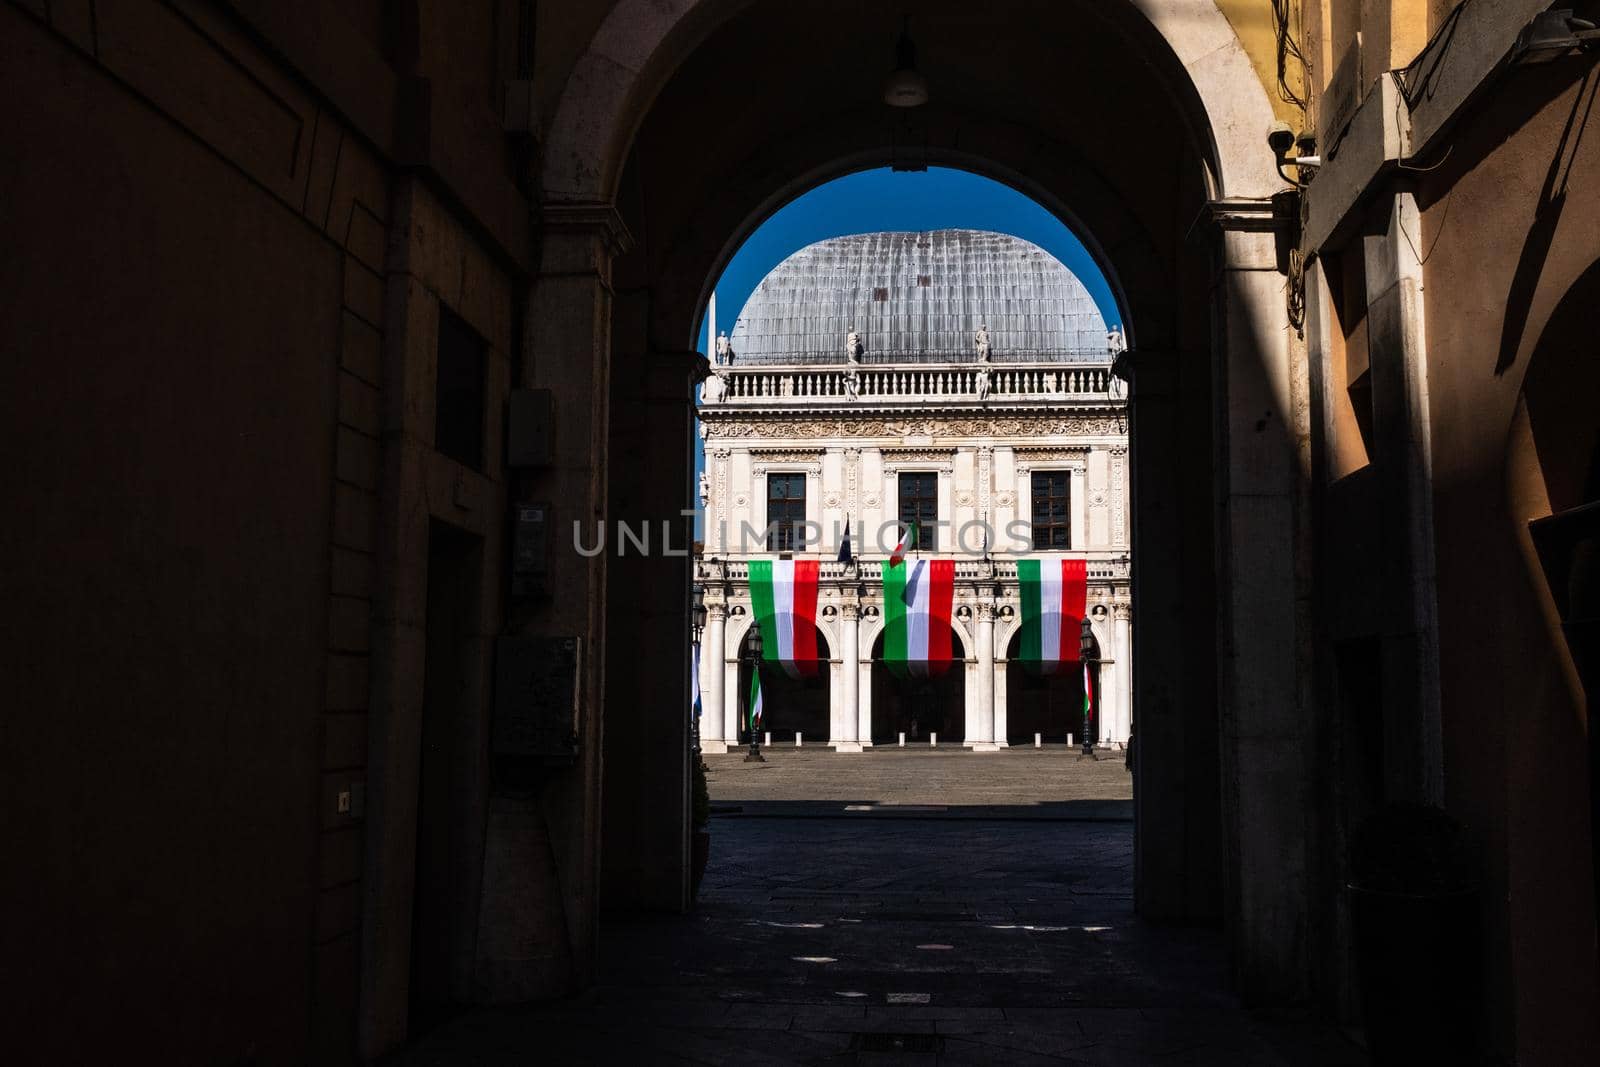 A suggestive view of the Palazzo della Loggia (Loggia Palace), seat of the Mayor of Brescia, decorated with large tricolor flags to celebrate the 75th anniversary of Italy's Liberation Day.
This commemoration was atypical: Italy celebrated this important day in a state of emergency over the coronavirus outbreak.